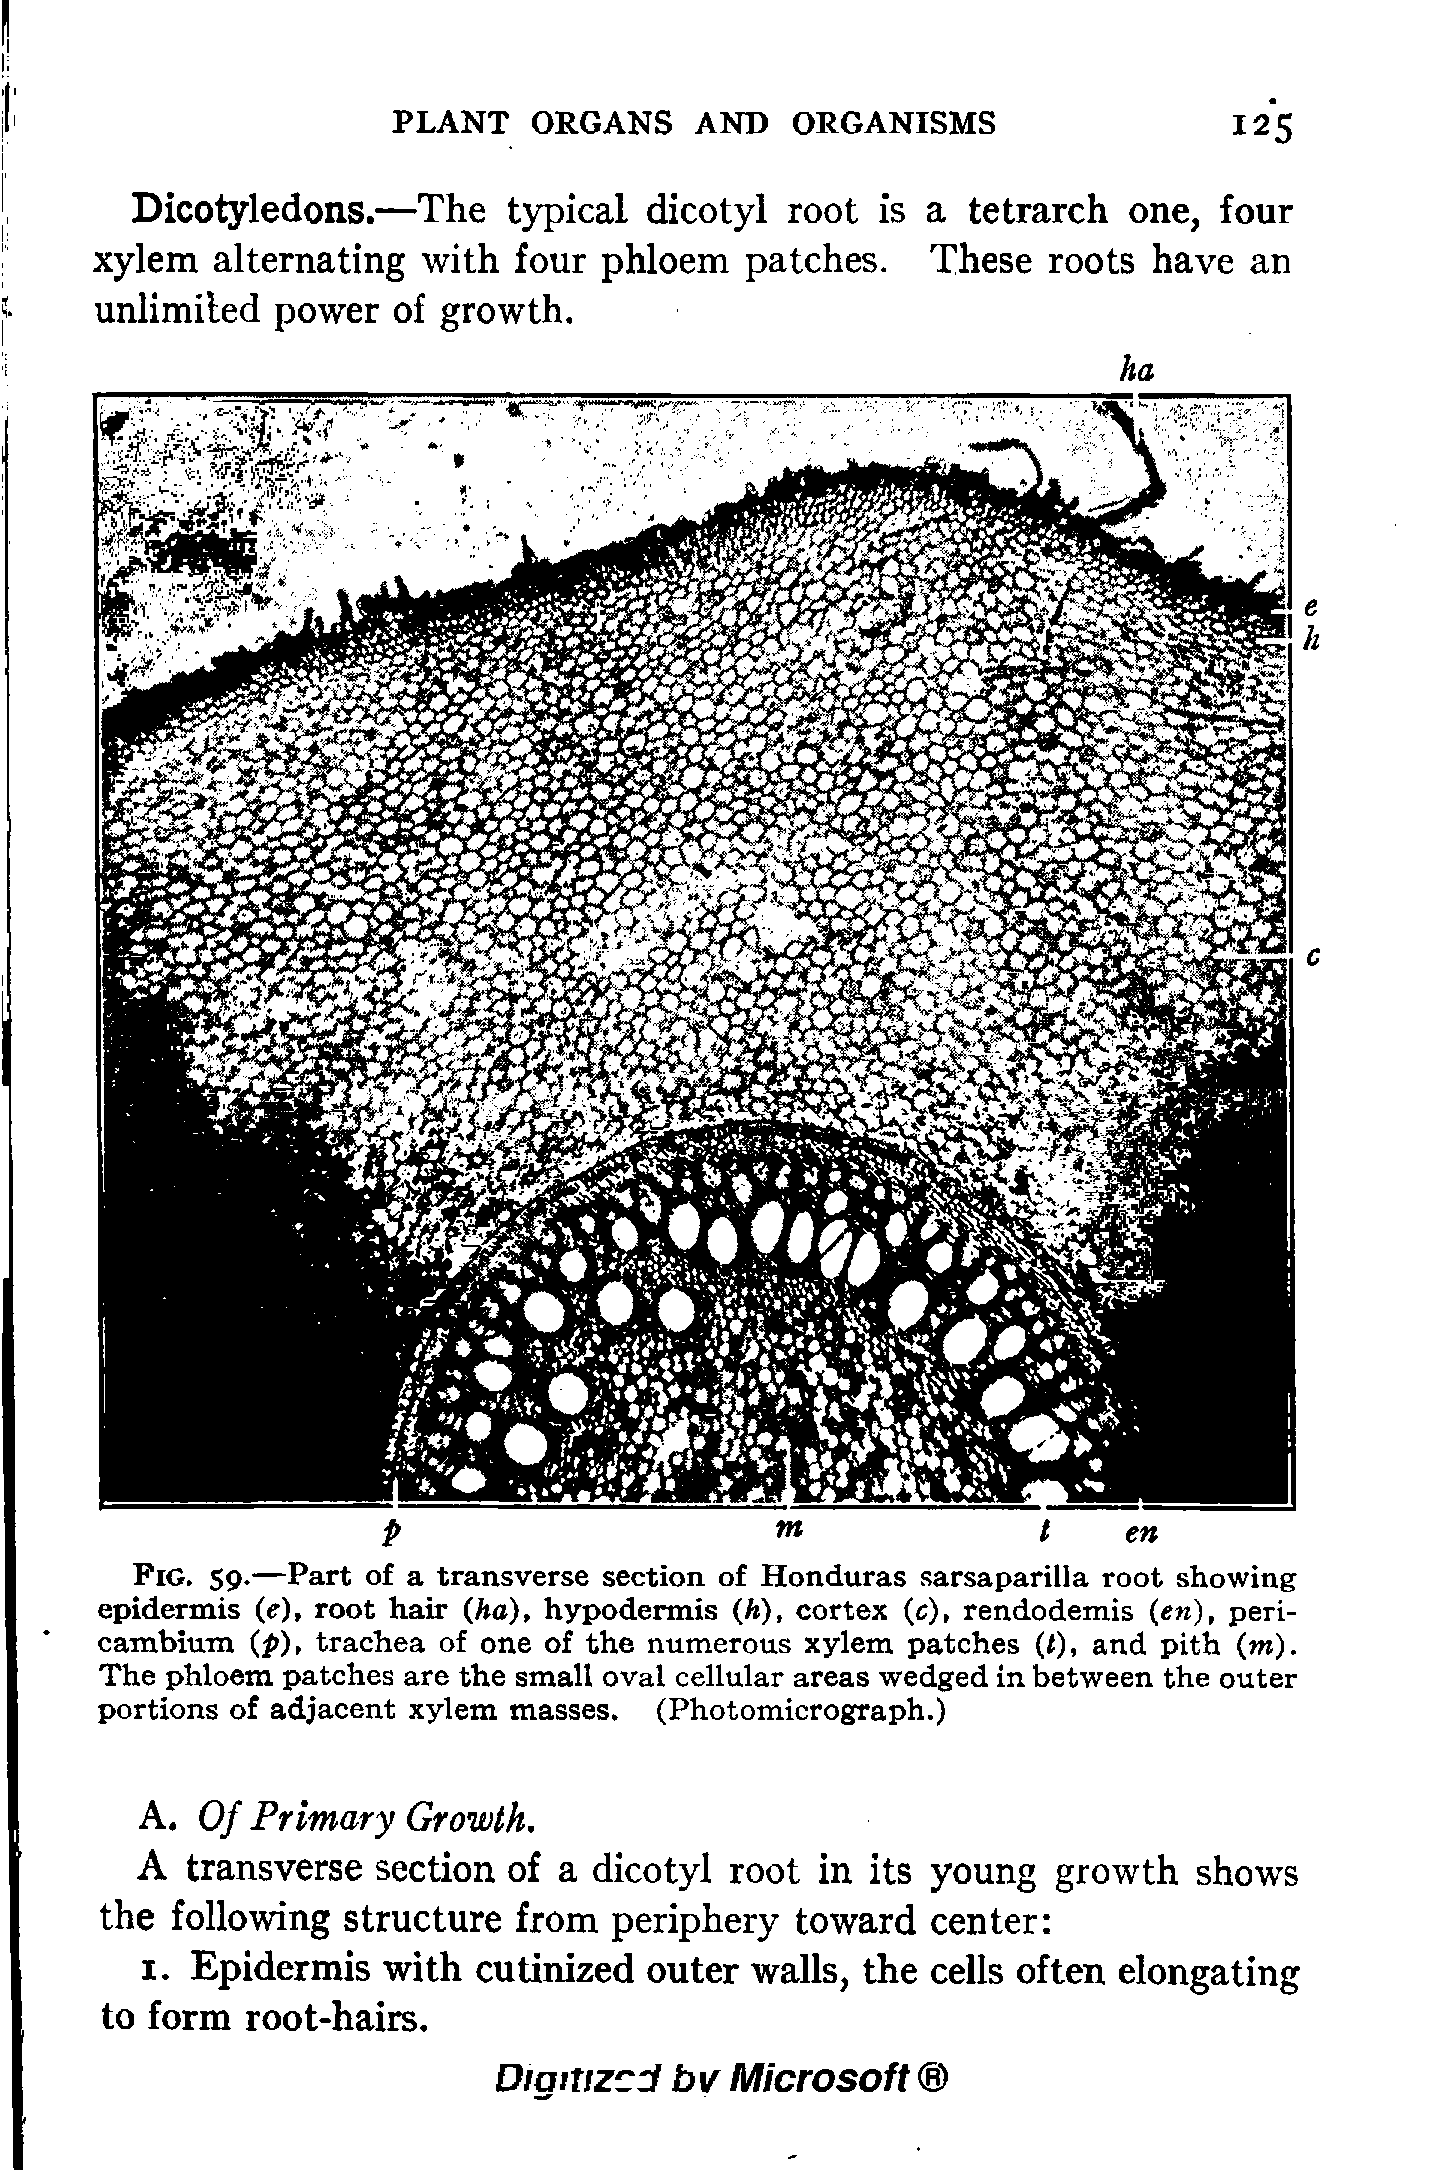 Fig. 59.—Part of a transverse section of Honduras sarsaparilla root showing epidermis (r), root hair (ha), hypodermis (A), cortex (c), rendodemis (en), peri-cambium (p), trachea of one of the numerous xylem patches (1), and pith (m). The phloem patches are the small oval cellular areas wedged in between the outer portions of adjacent xylem masses. (Photomicrograph.)...